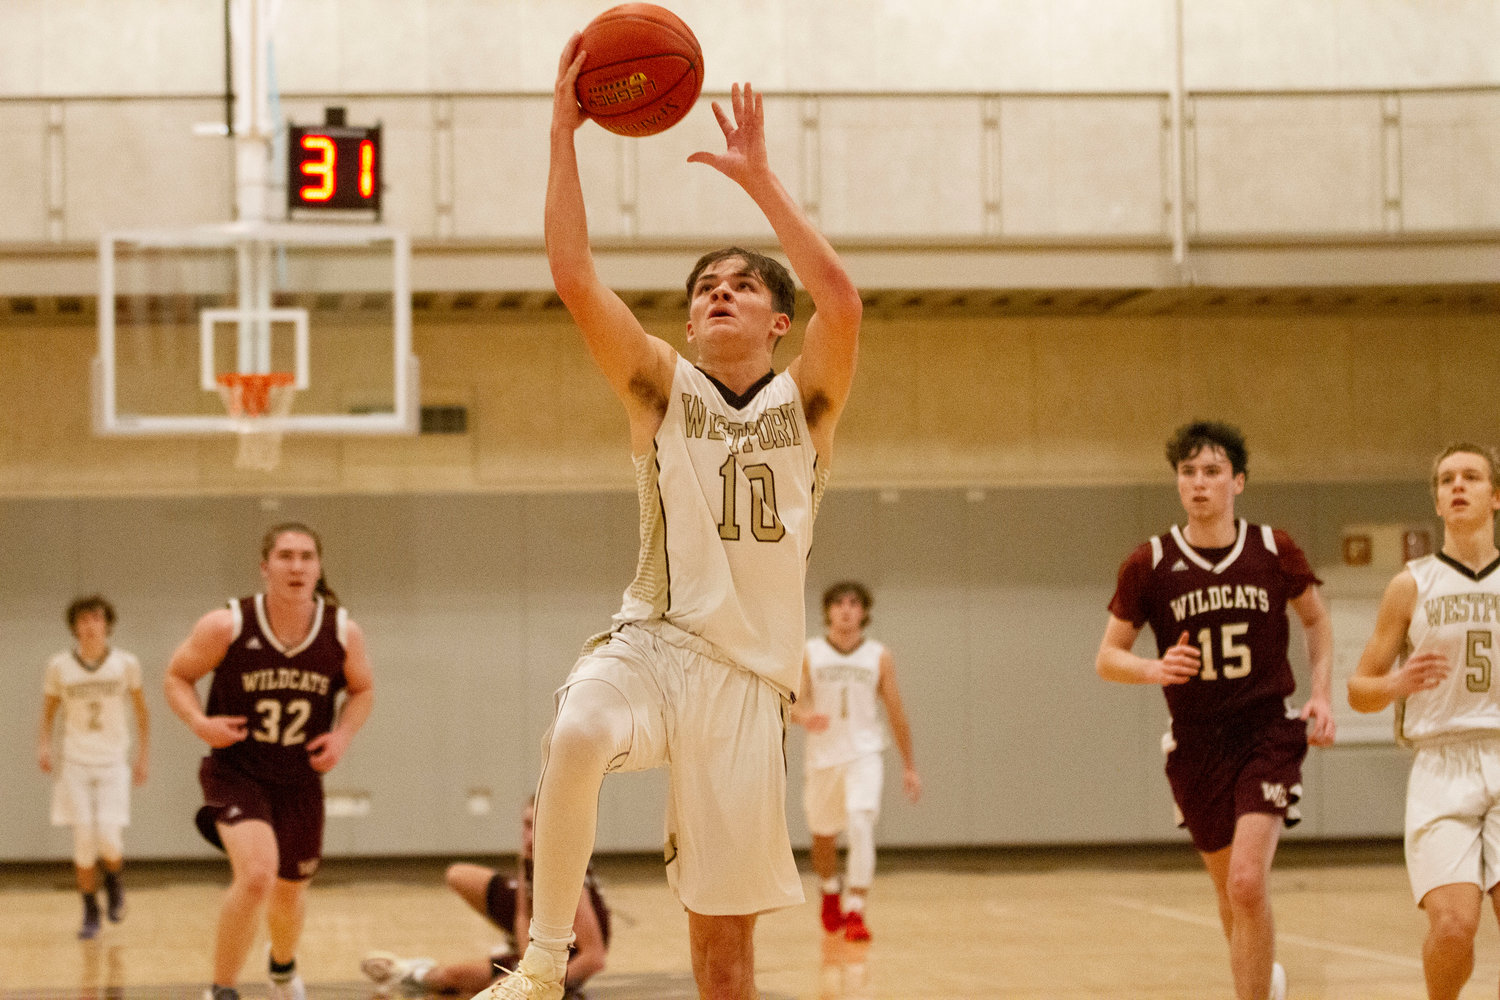 Cam Leary, a senior co-captain, scored 4 points against Atlantis and 13 versus Holbrook. He has developed a knack for hitting big shots, like the 3-pointer he sank in the second half of the team's big win over West Bridgewater last Friday.